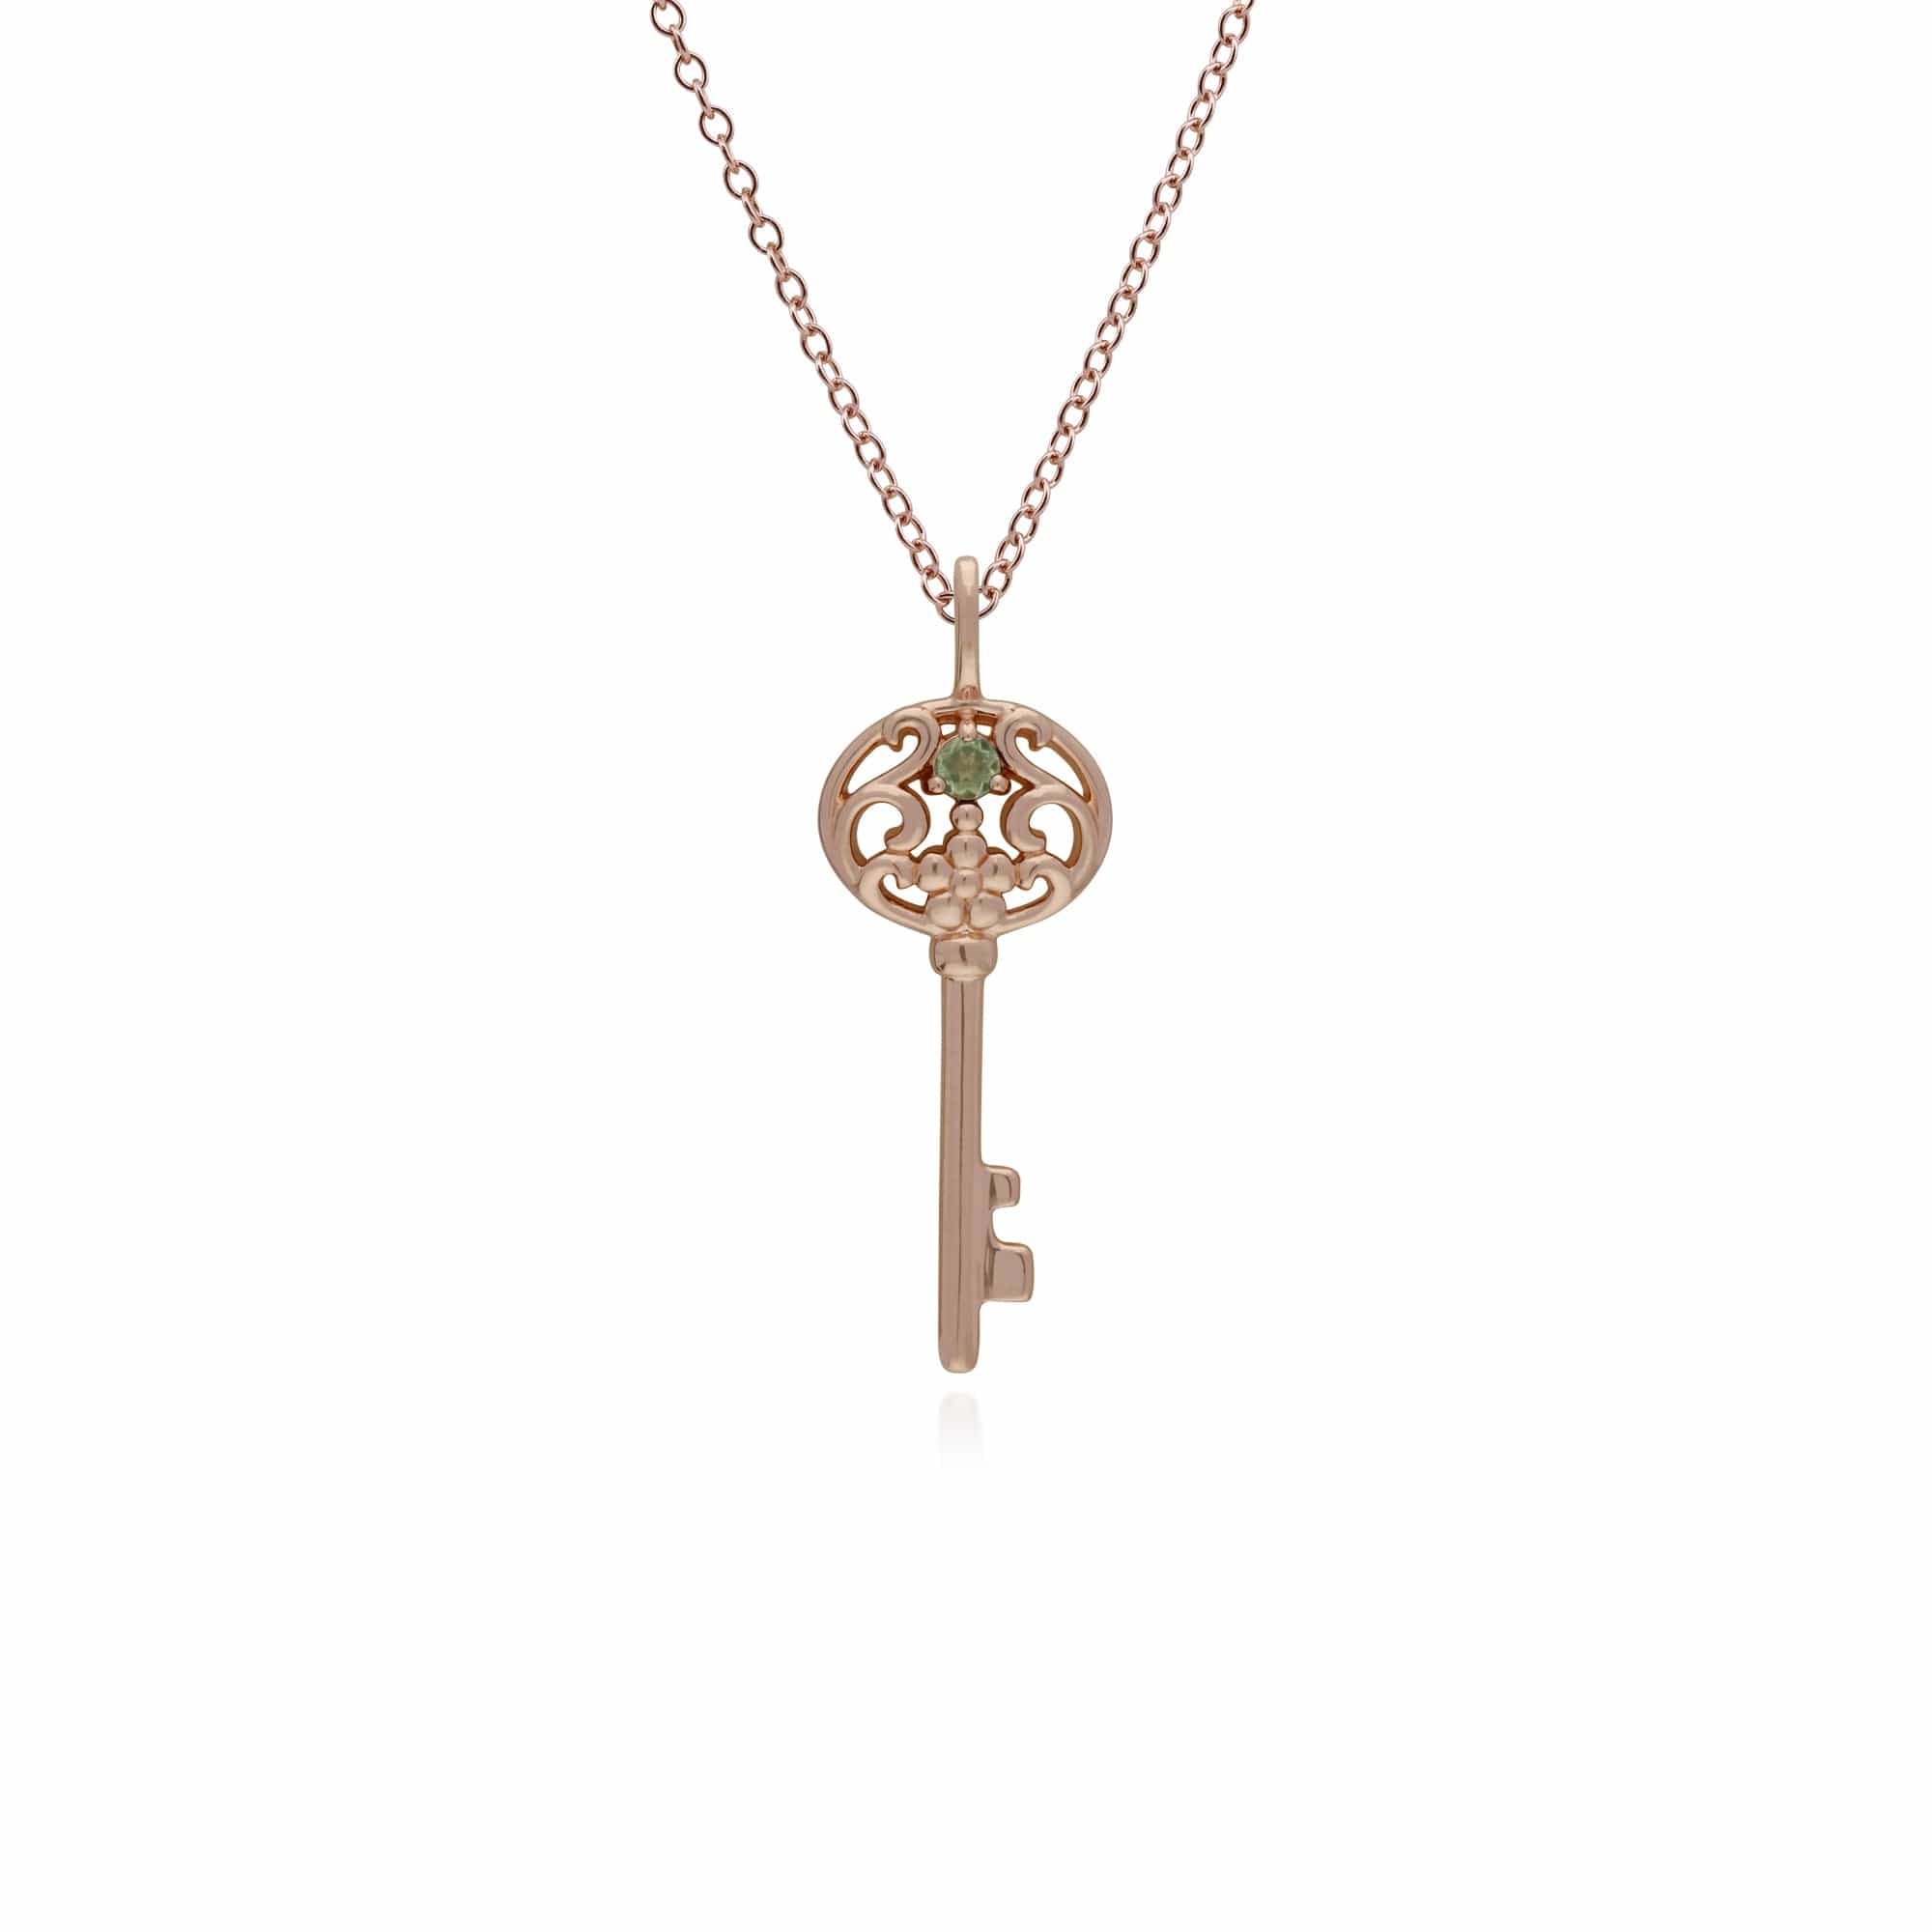 270P026708925-270P026501925 Classic Swirl Heart Lock Pendant & Peridot Big Key Charm in Rose Gold Plated 925 Sterling Silver 2